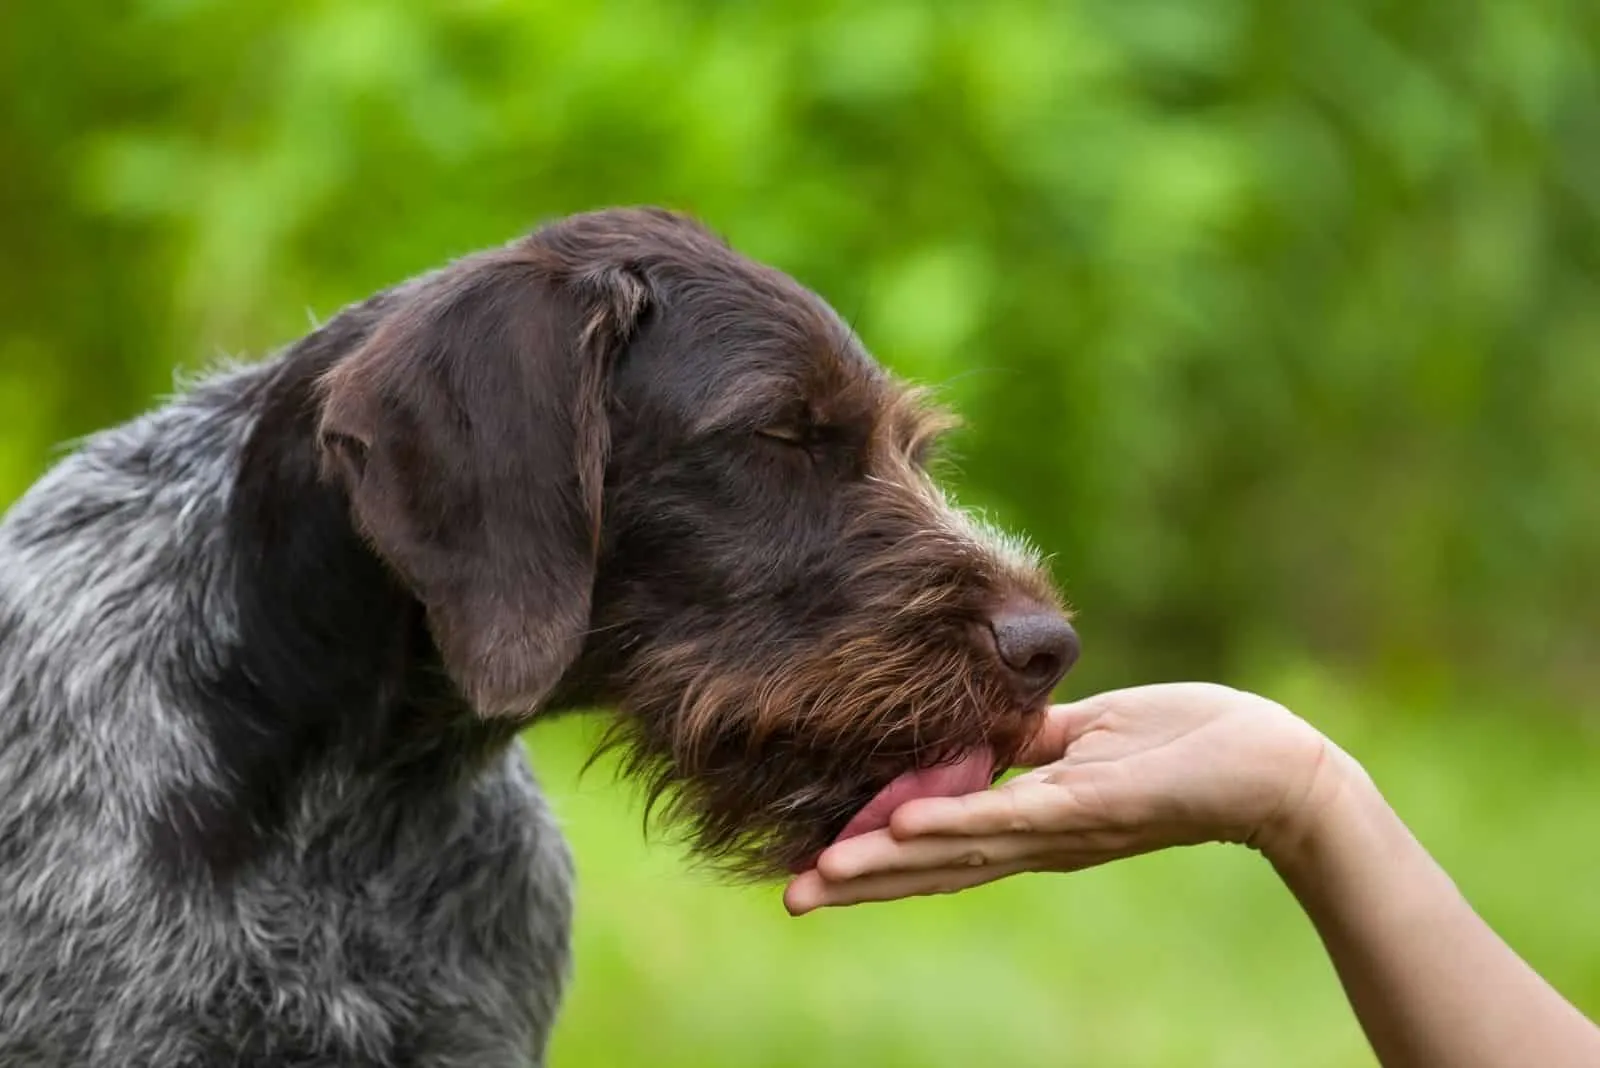 dog licking hand of a woman outdoors